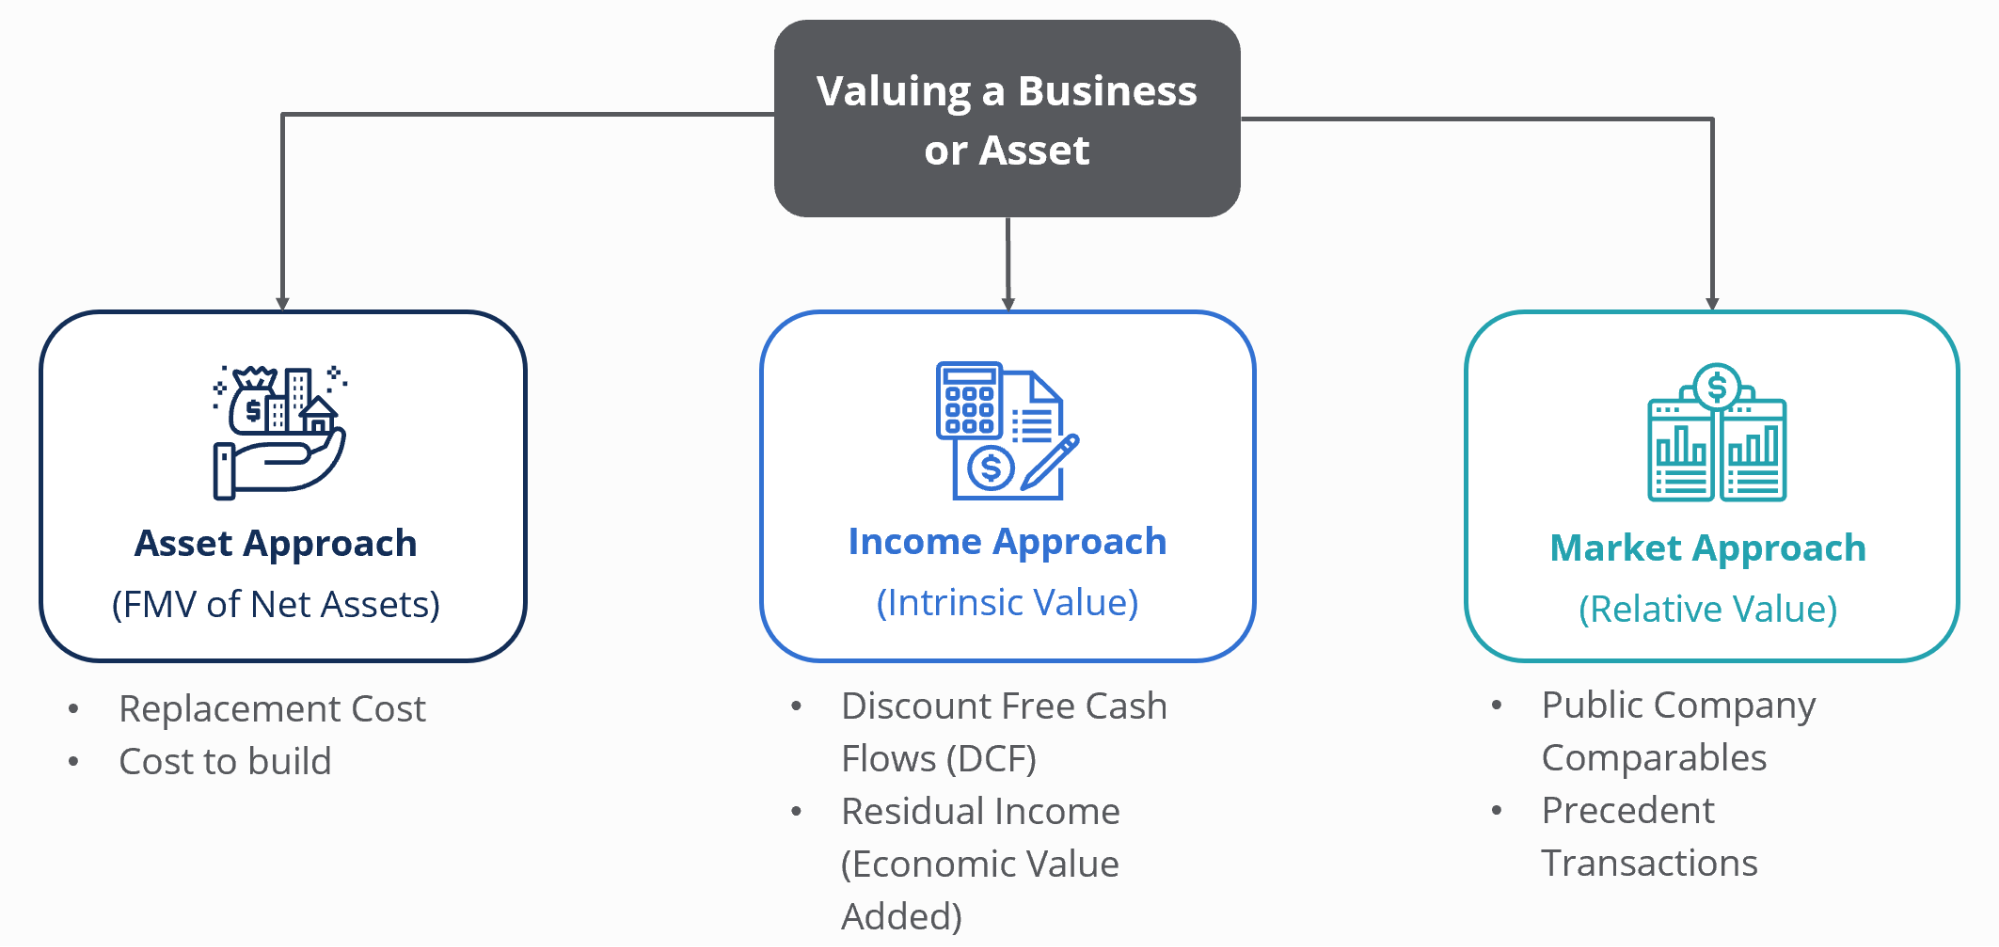 Chart explaining the process of valuing a business or asset using three different approaches: asset approach, income approach, and market approach